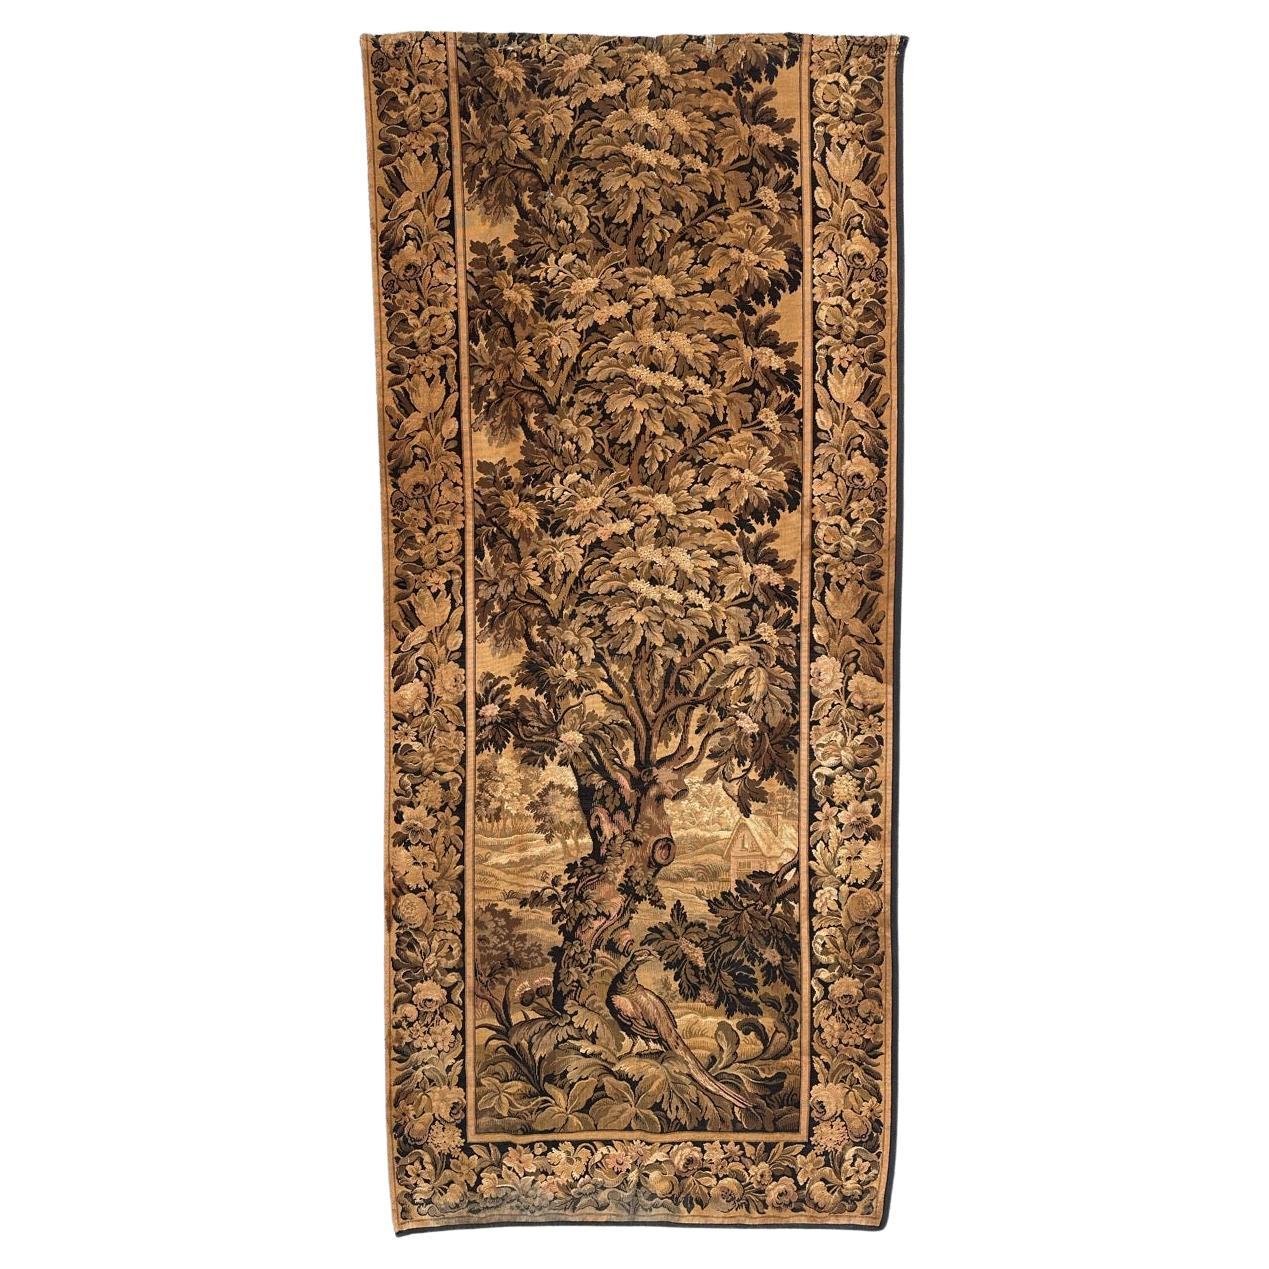 Pretty early 20th century French Aubusson style Jacquard Tapestry